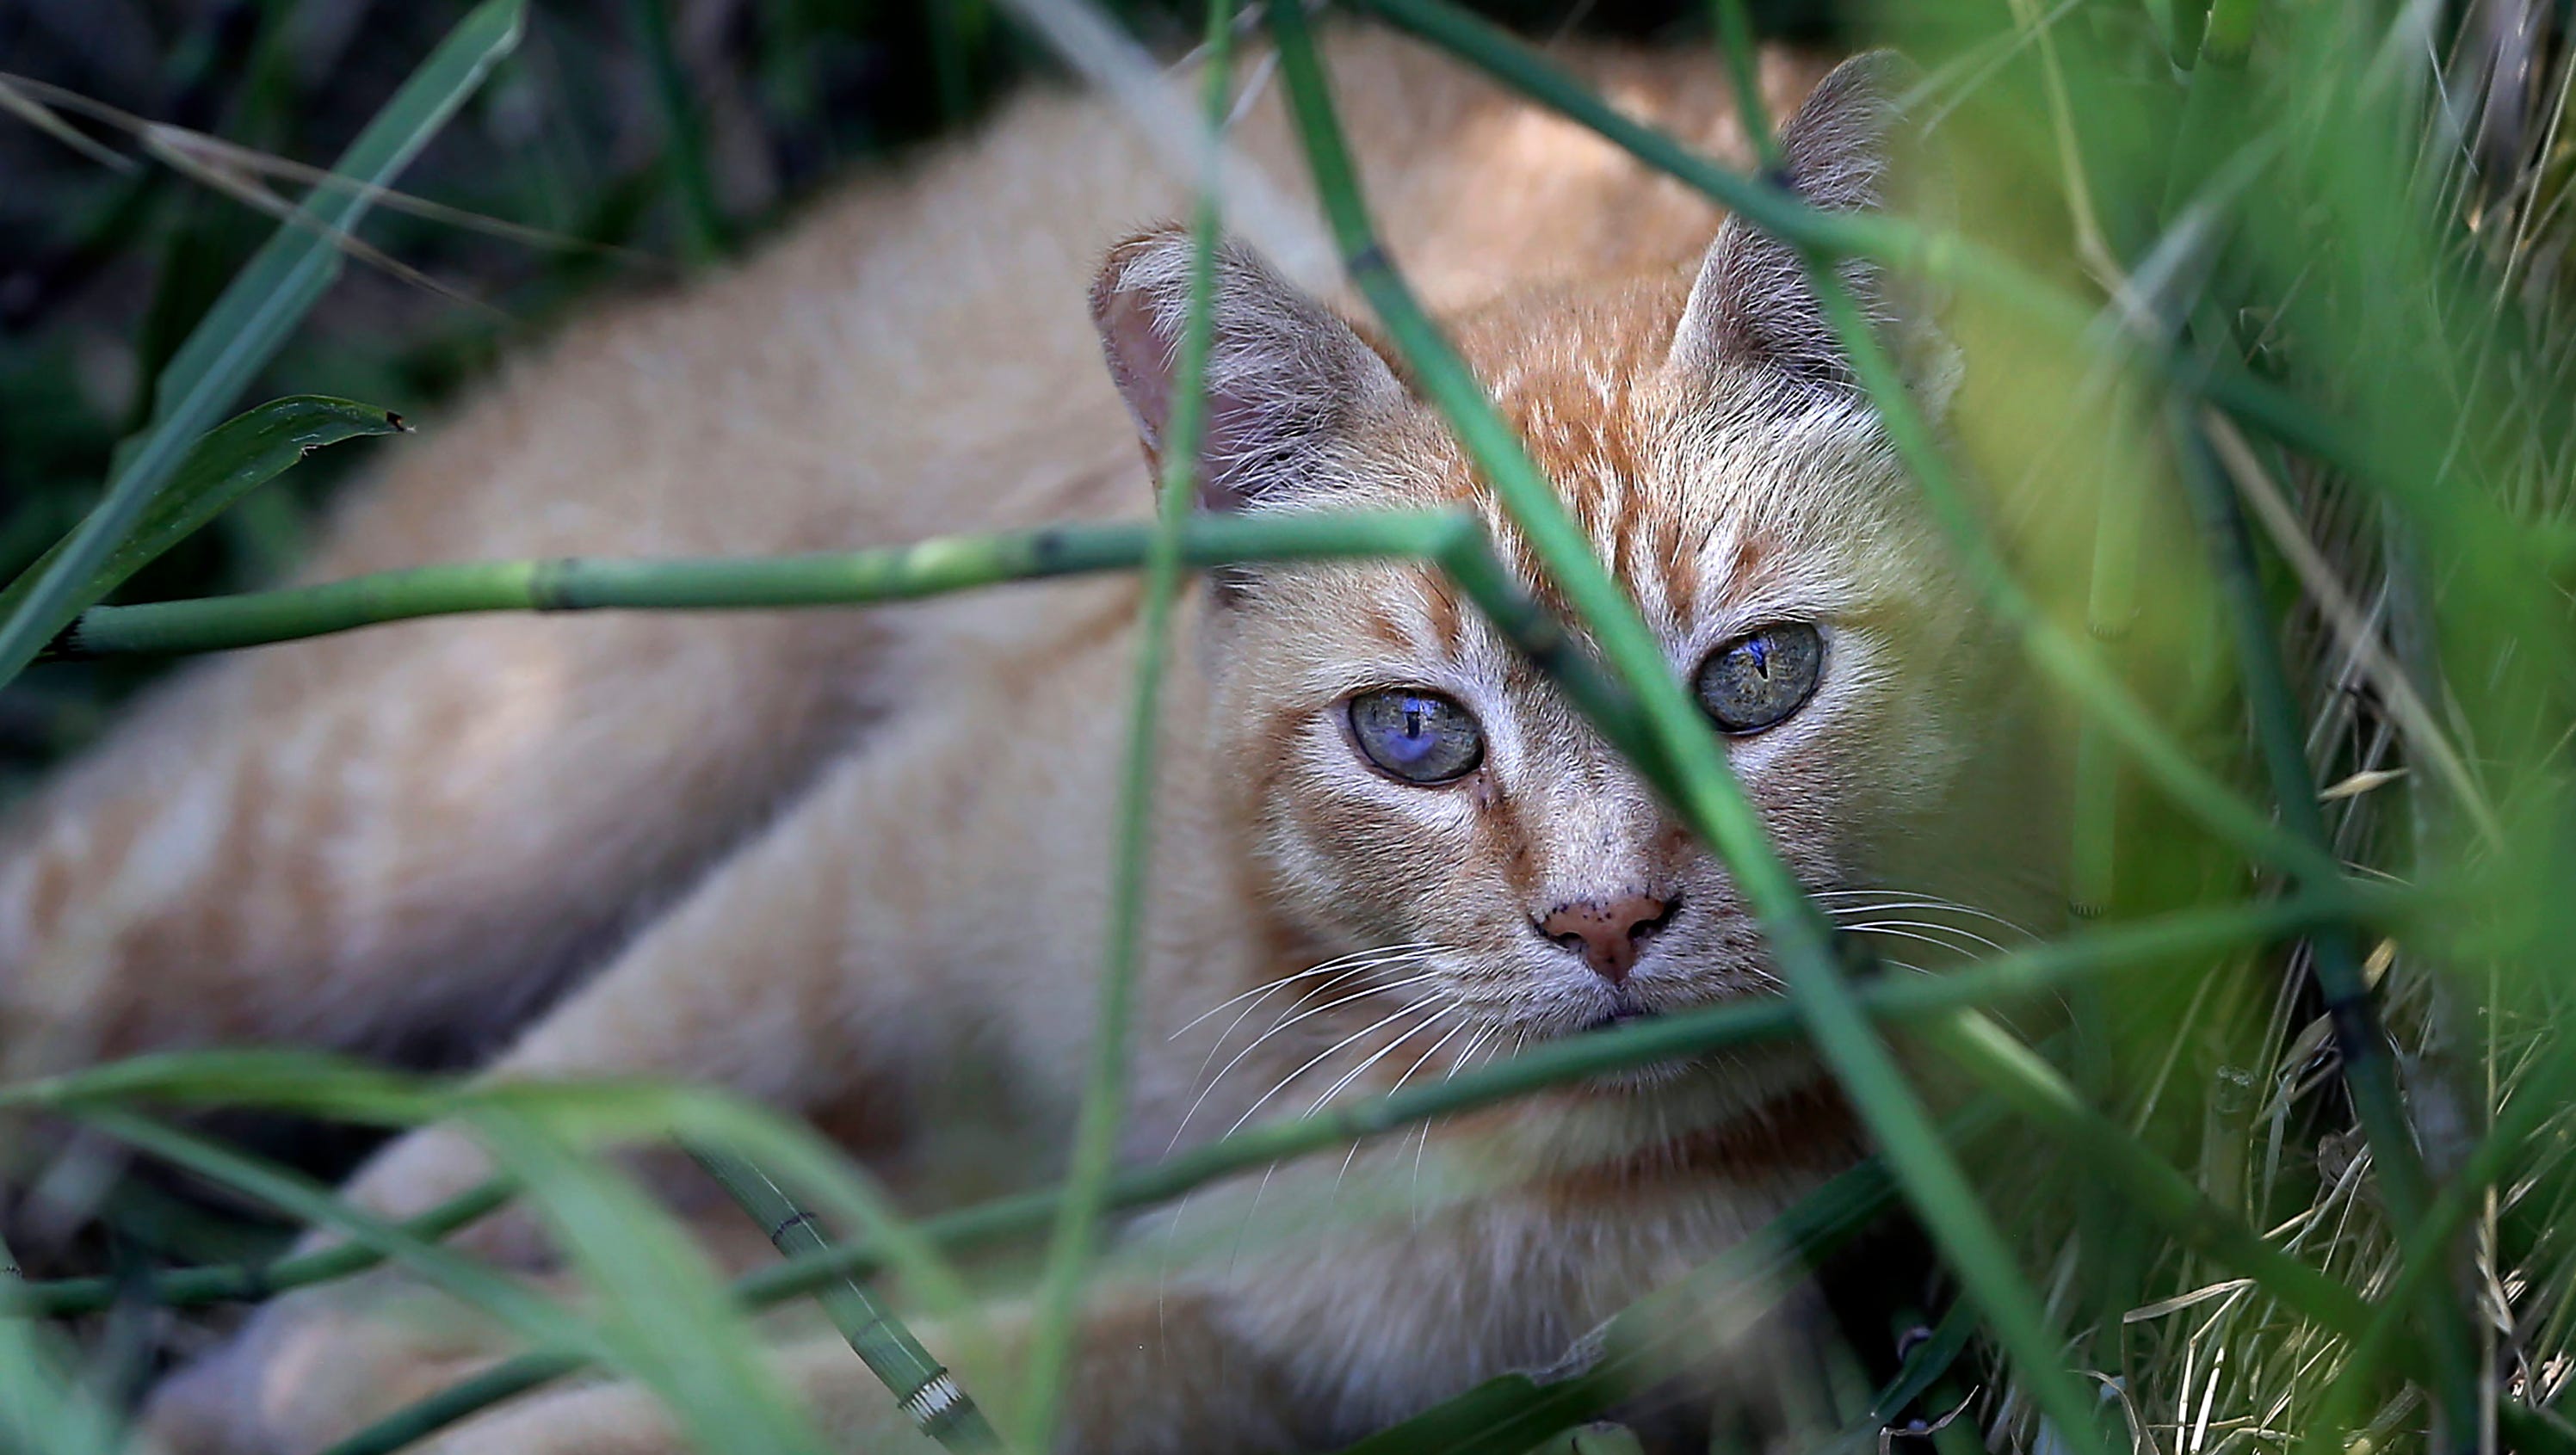 Top invasive species in the West include feral cats, feral hogs